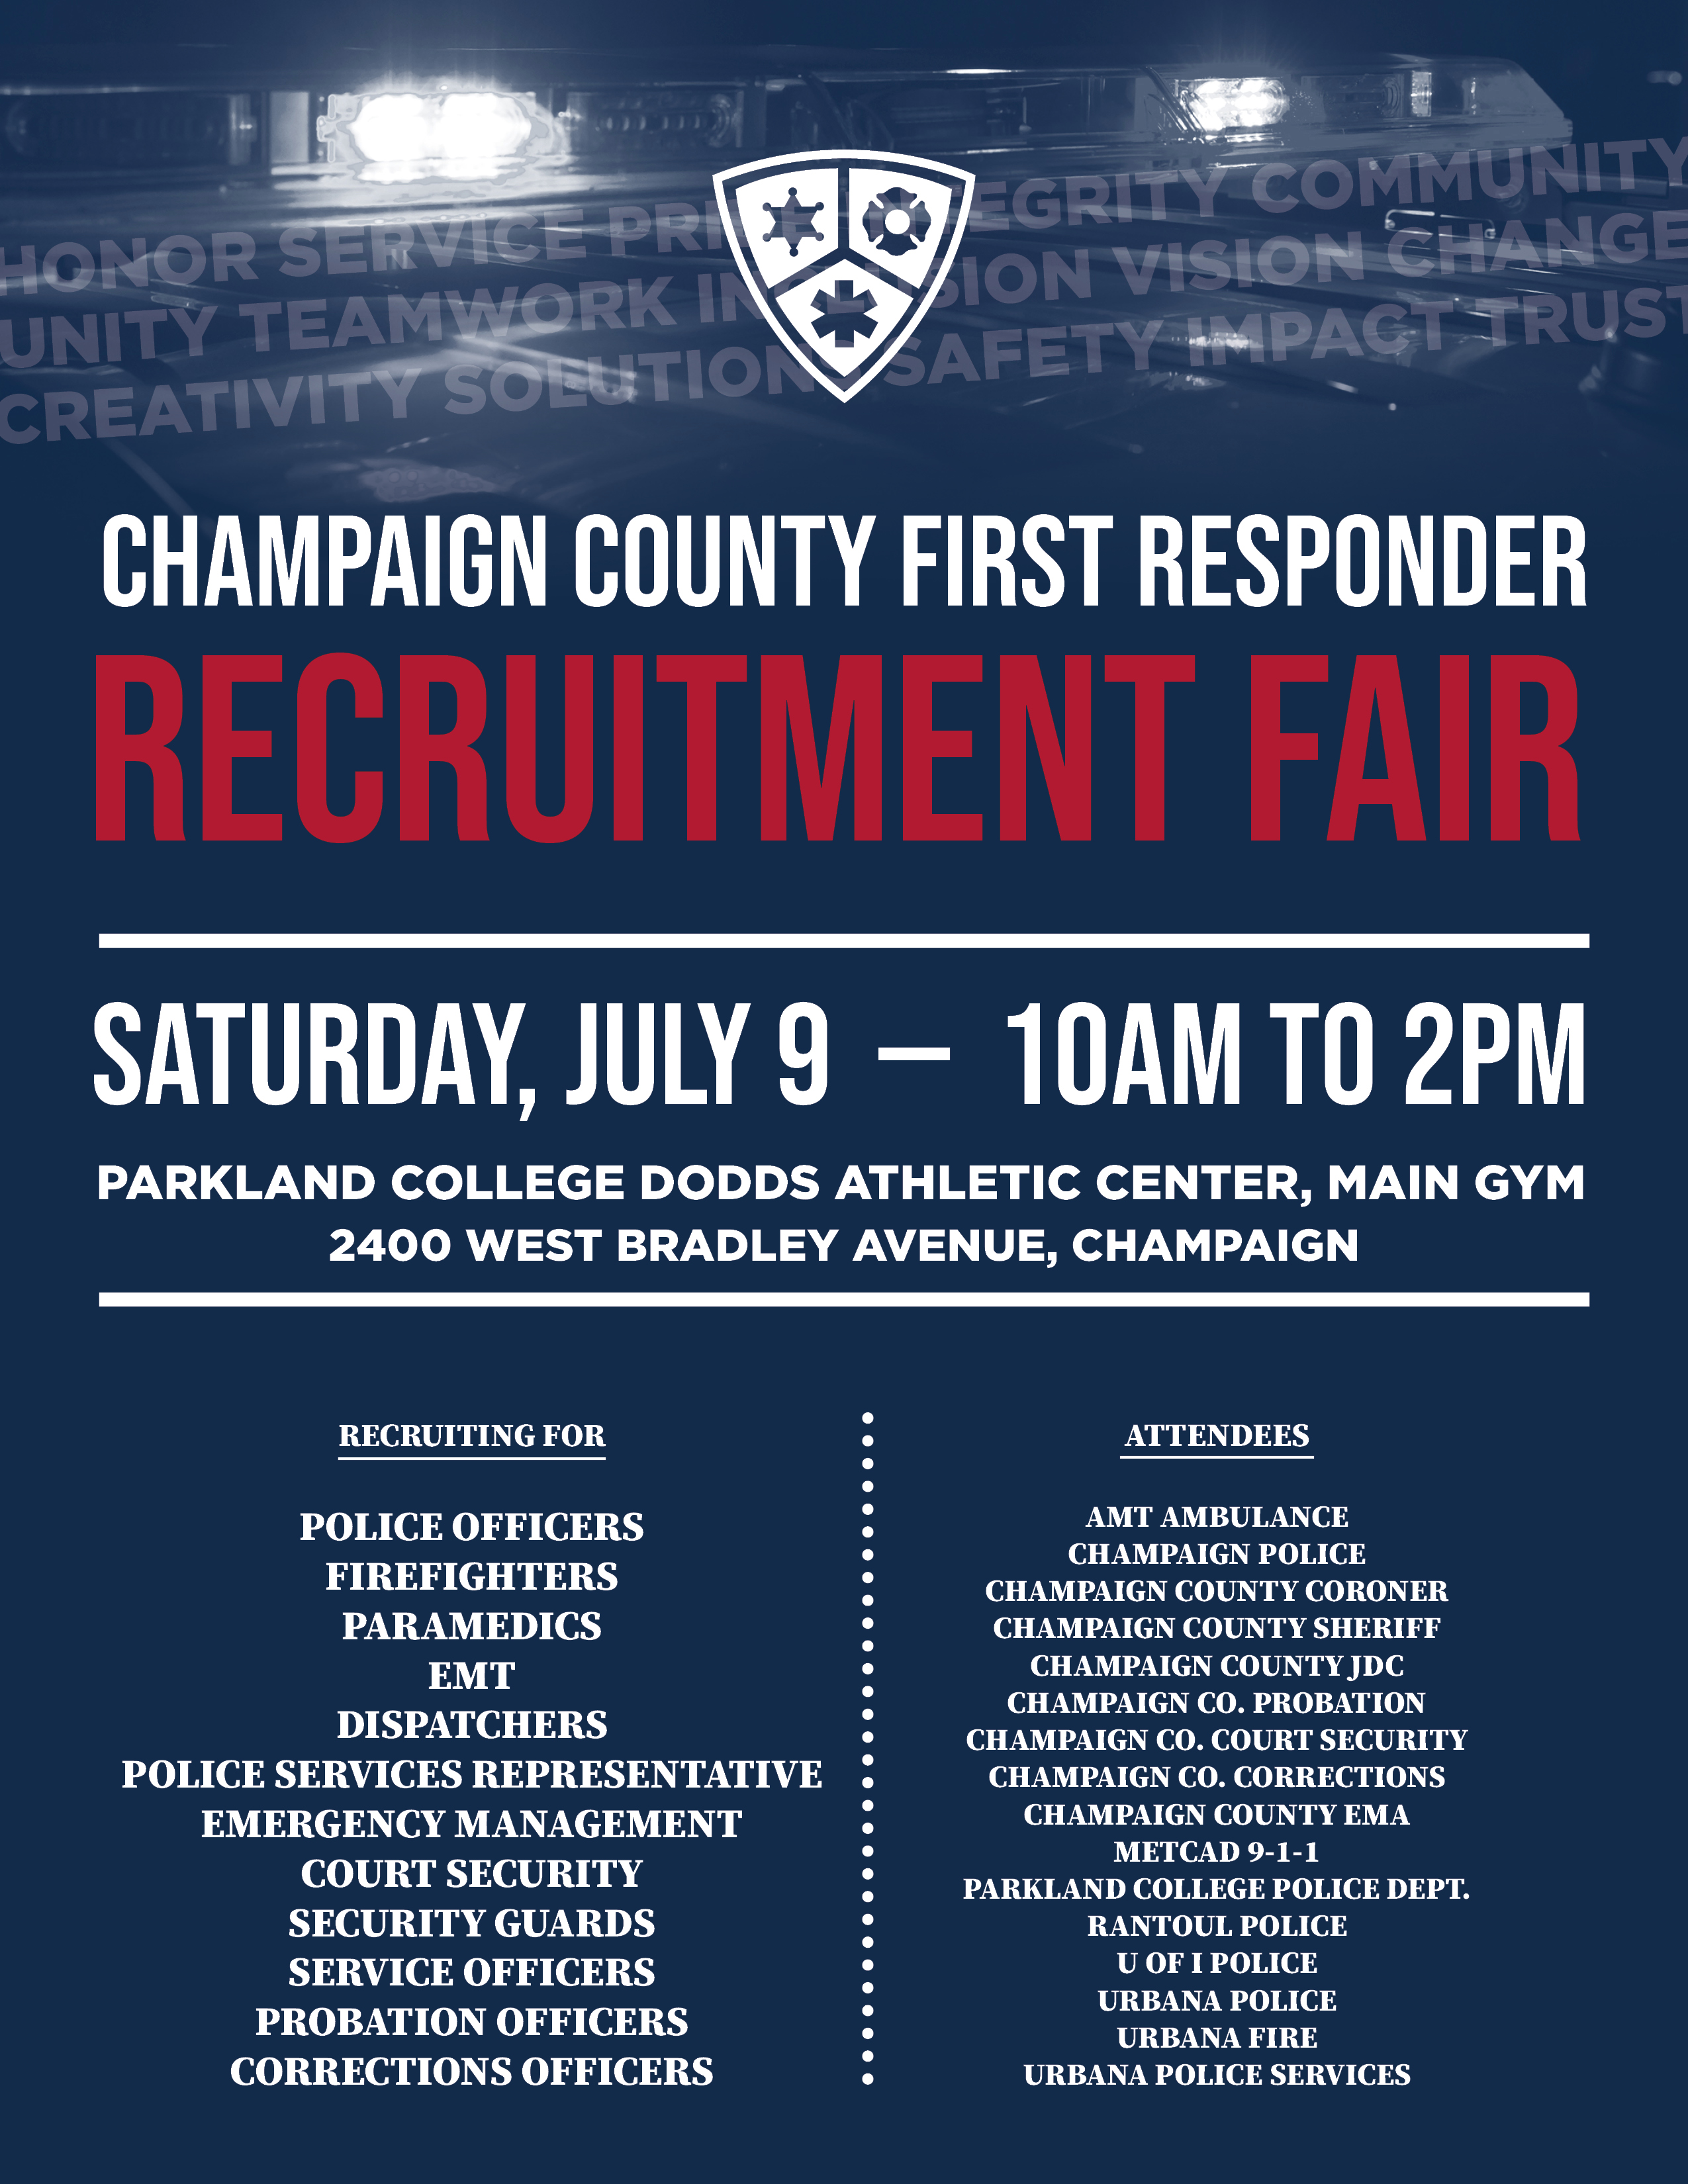 Champaign County First Responder Recruitment Fair Saturday July 9 from 10 am to 2 pm at Parkland College Dodds Athletic Center Main Gym